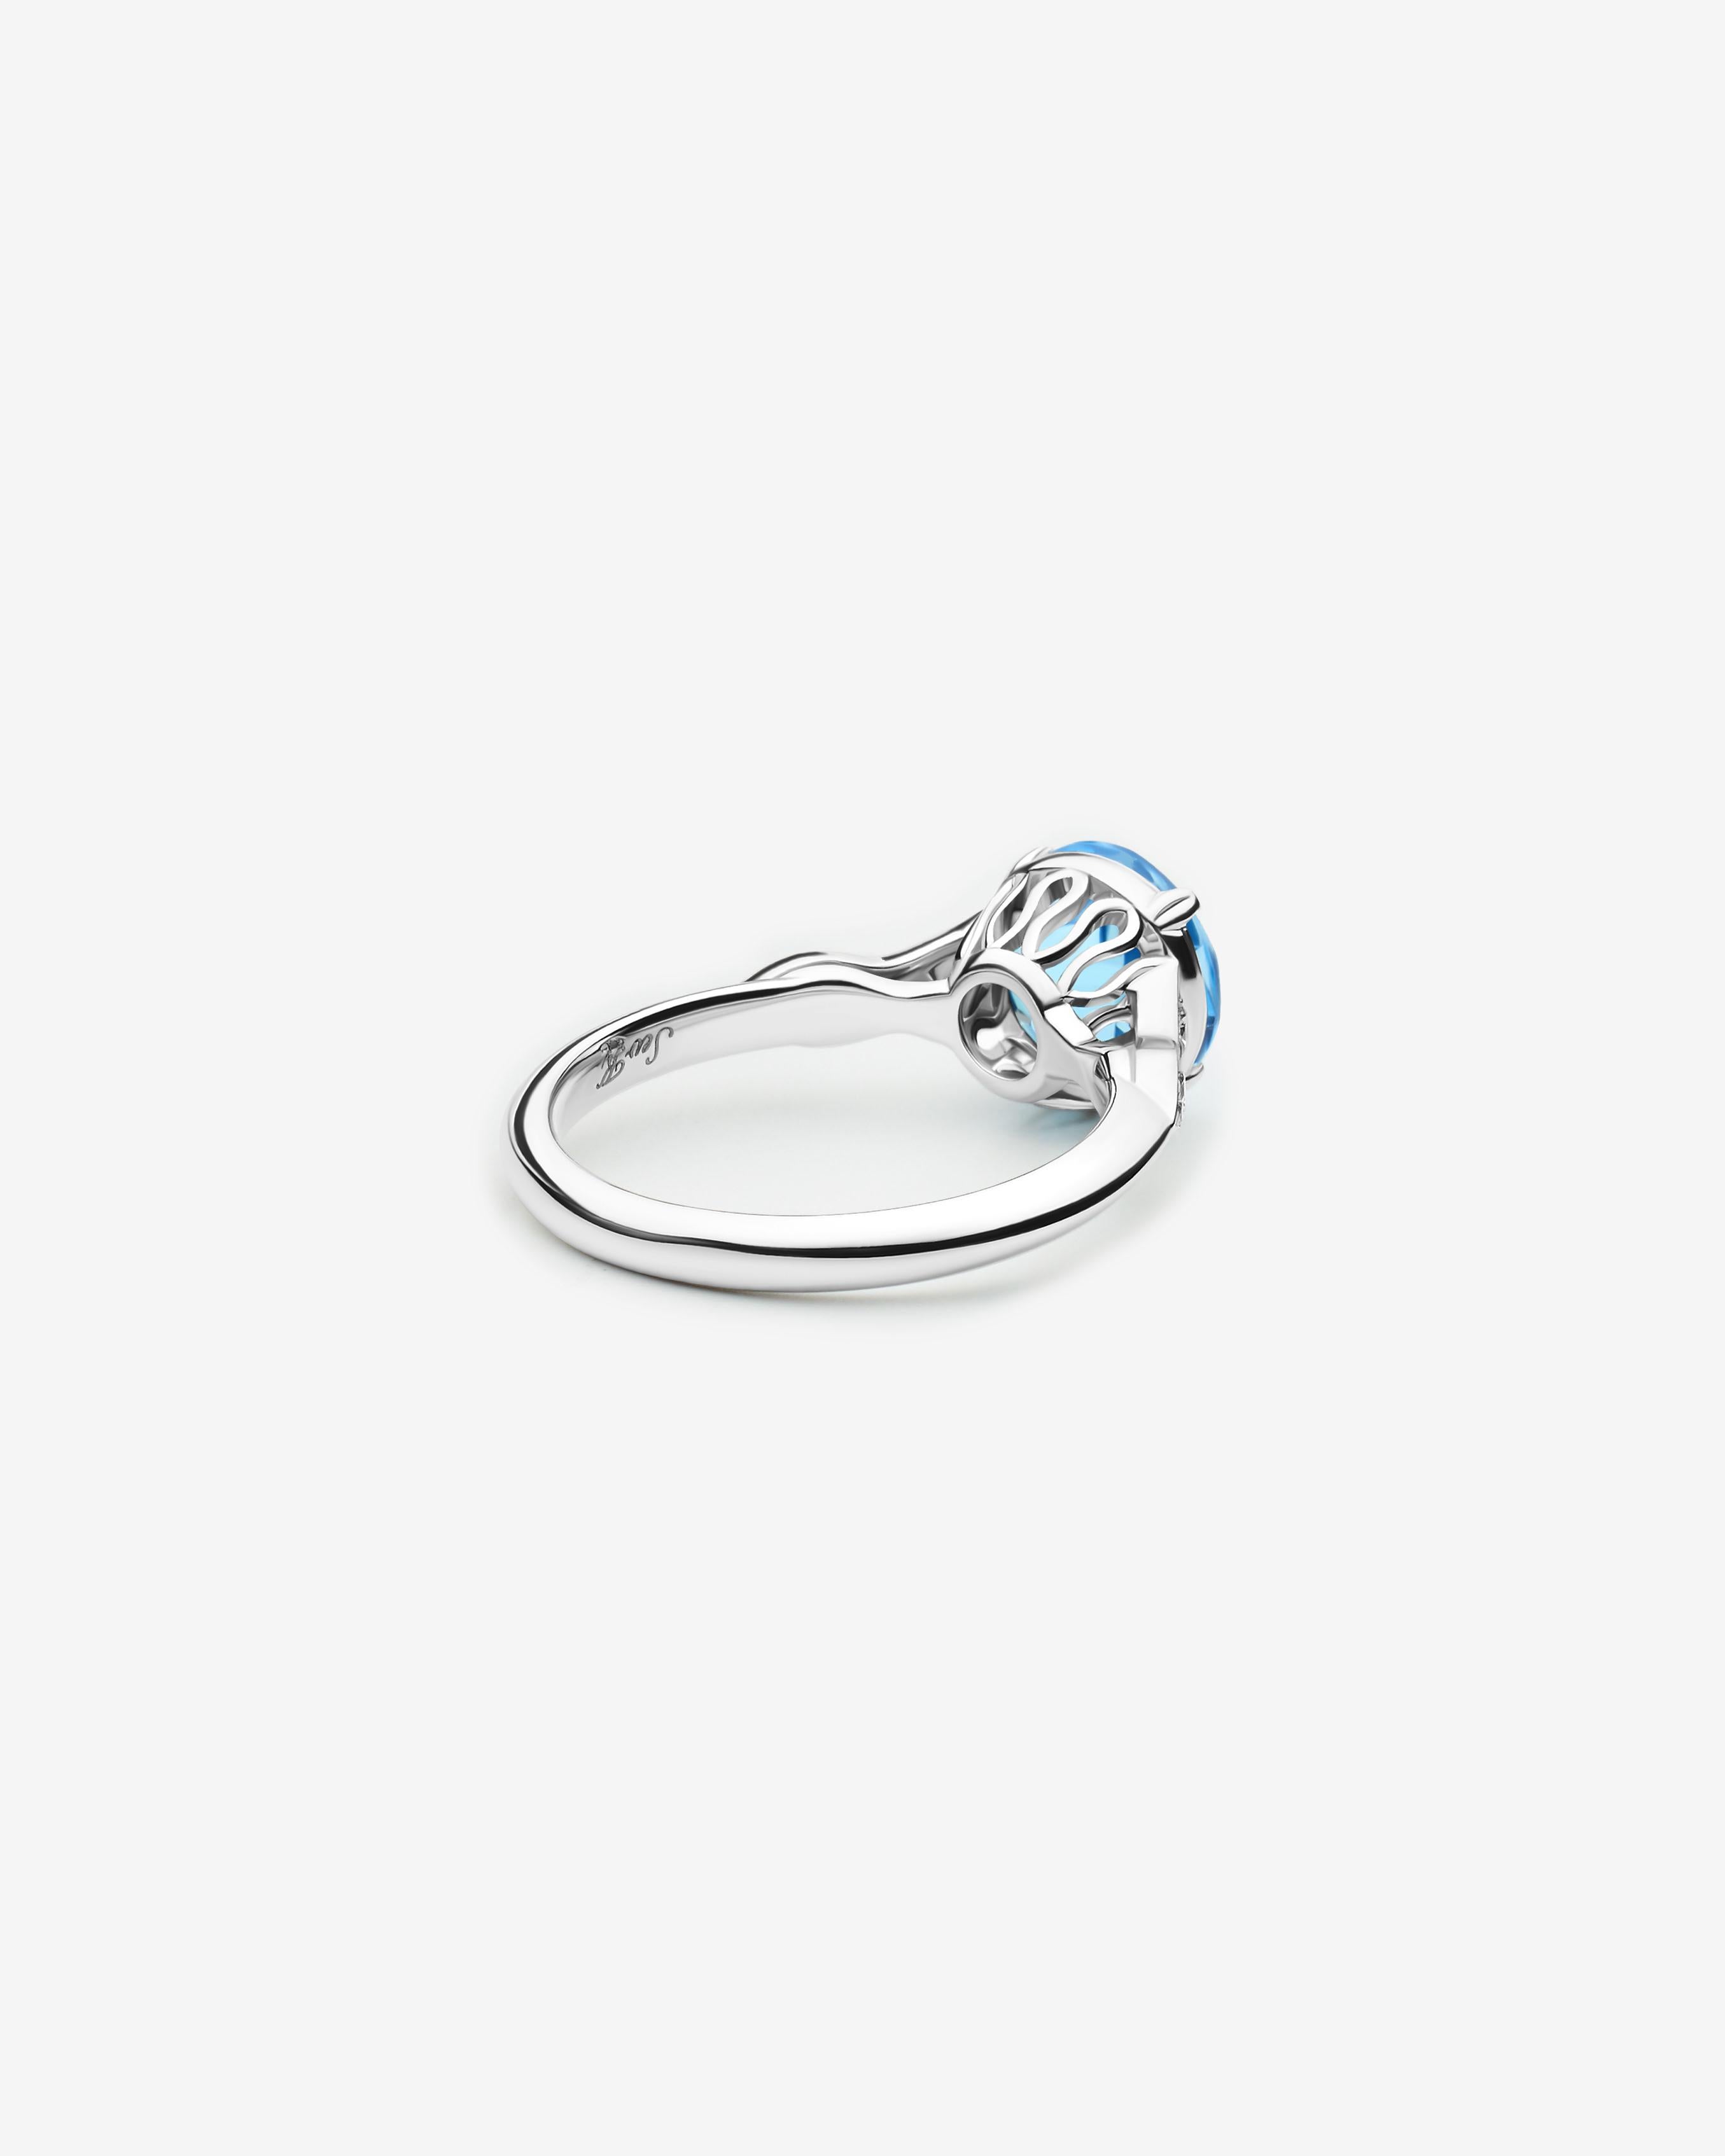 For Sale:  14k White Gold Diamond Engagement Ring with 2.36 Carat Round Blue Topaz 3